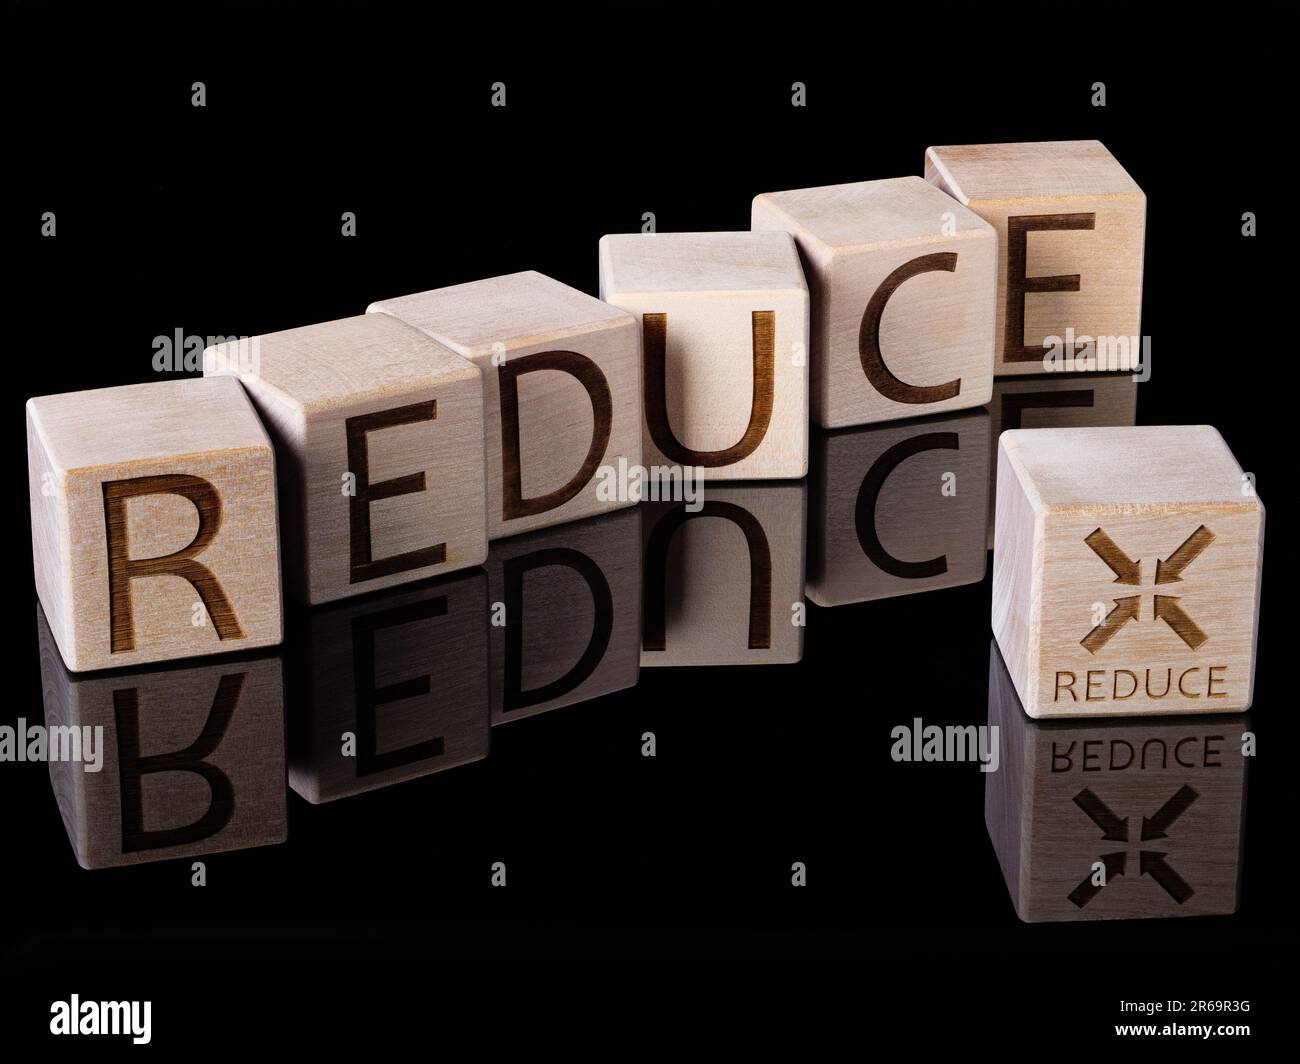 Text Reduce as sustainable resources concept Stock Photo